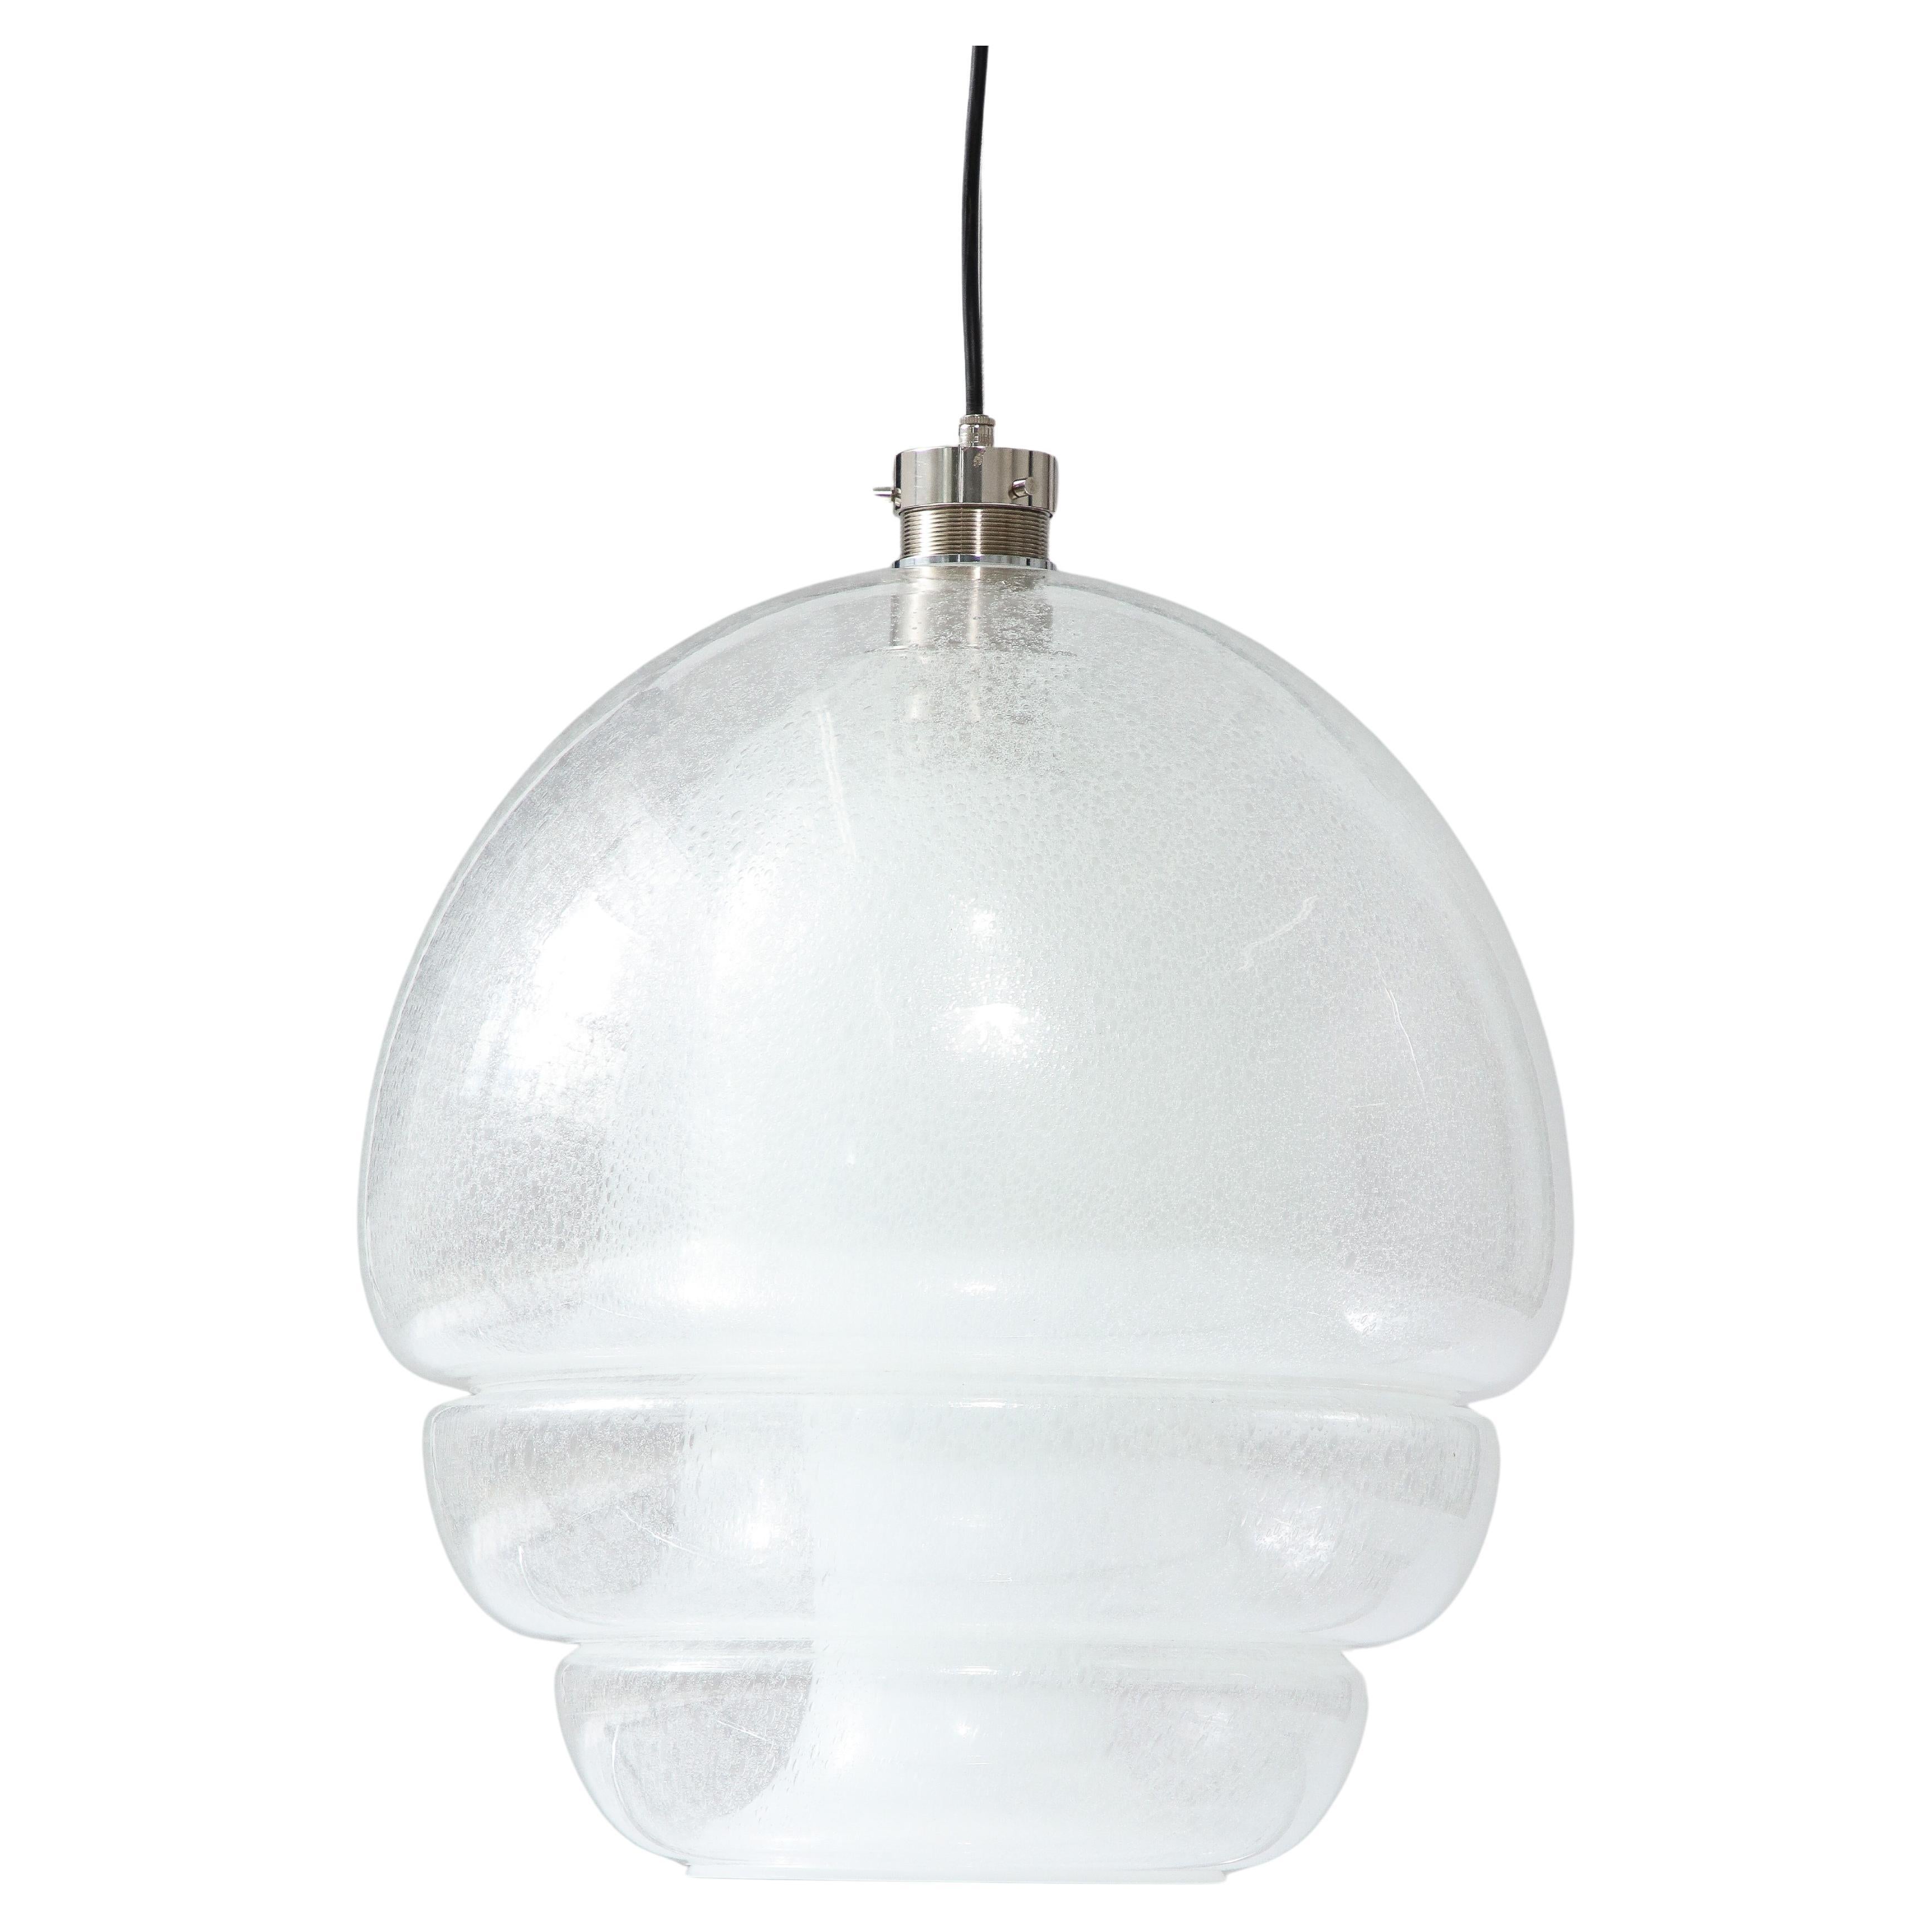 LS 134 Medusa Ceiling Lamp/Pendant by Carlo Nason, Italy, c. 1960 For Sale